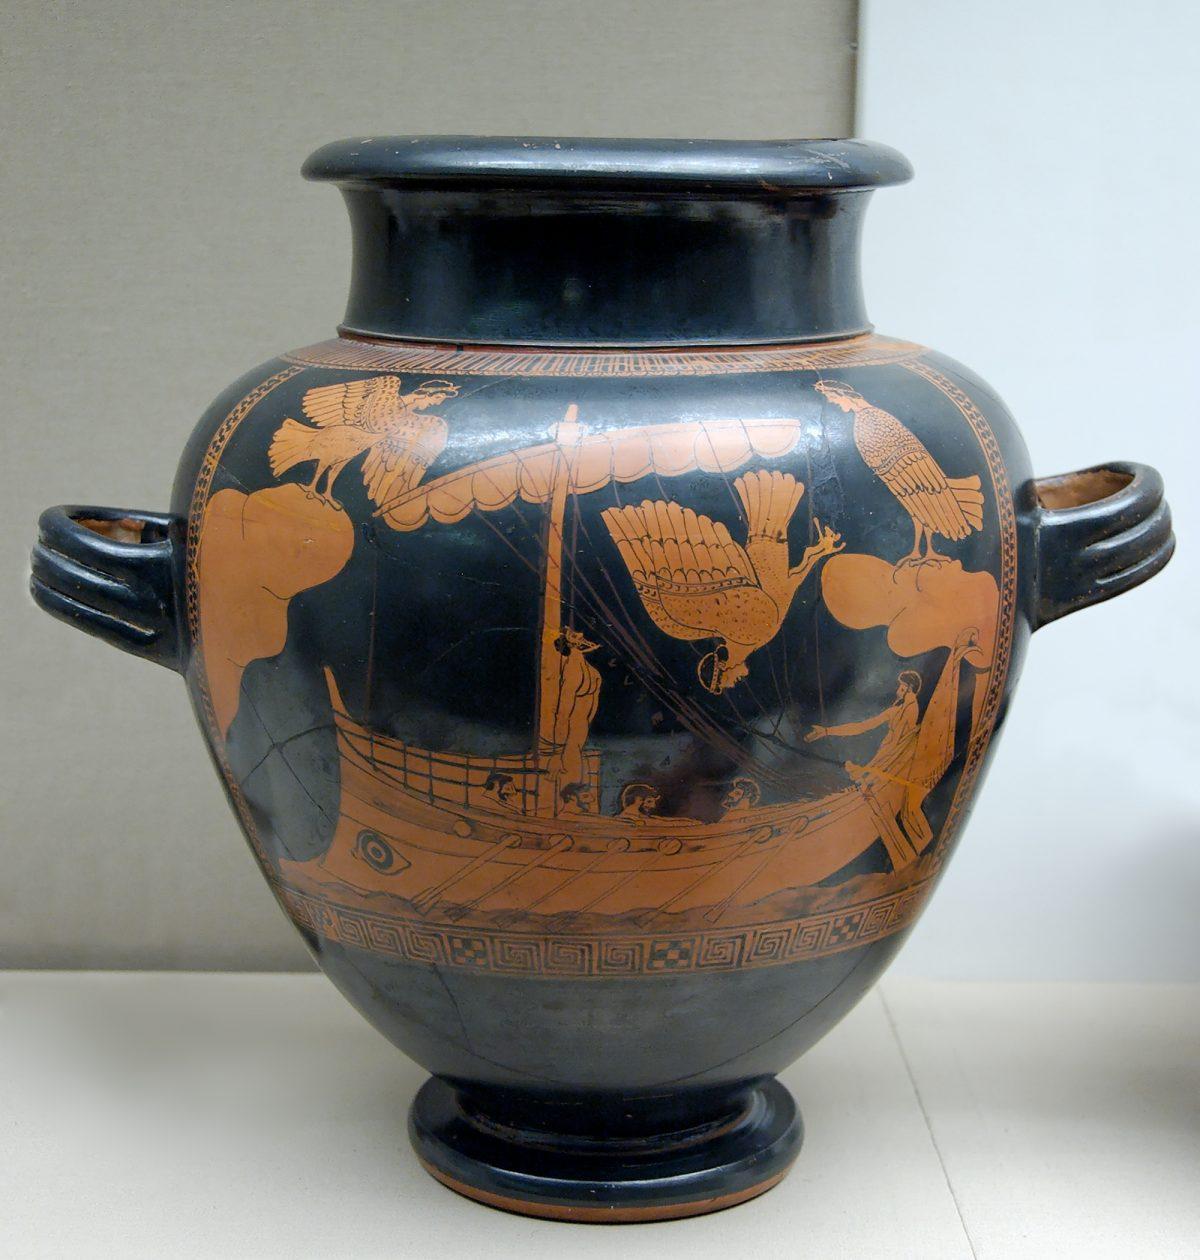 “The Siren Vase,” fifth century B.C., by the Siren Painter; Vulci, Greece. Earthenware, height: 13 ¾ inches. British Museum, London. (CC BY-NC-SA 4.0)